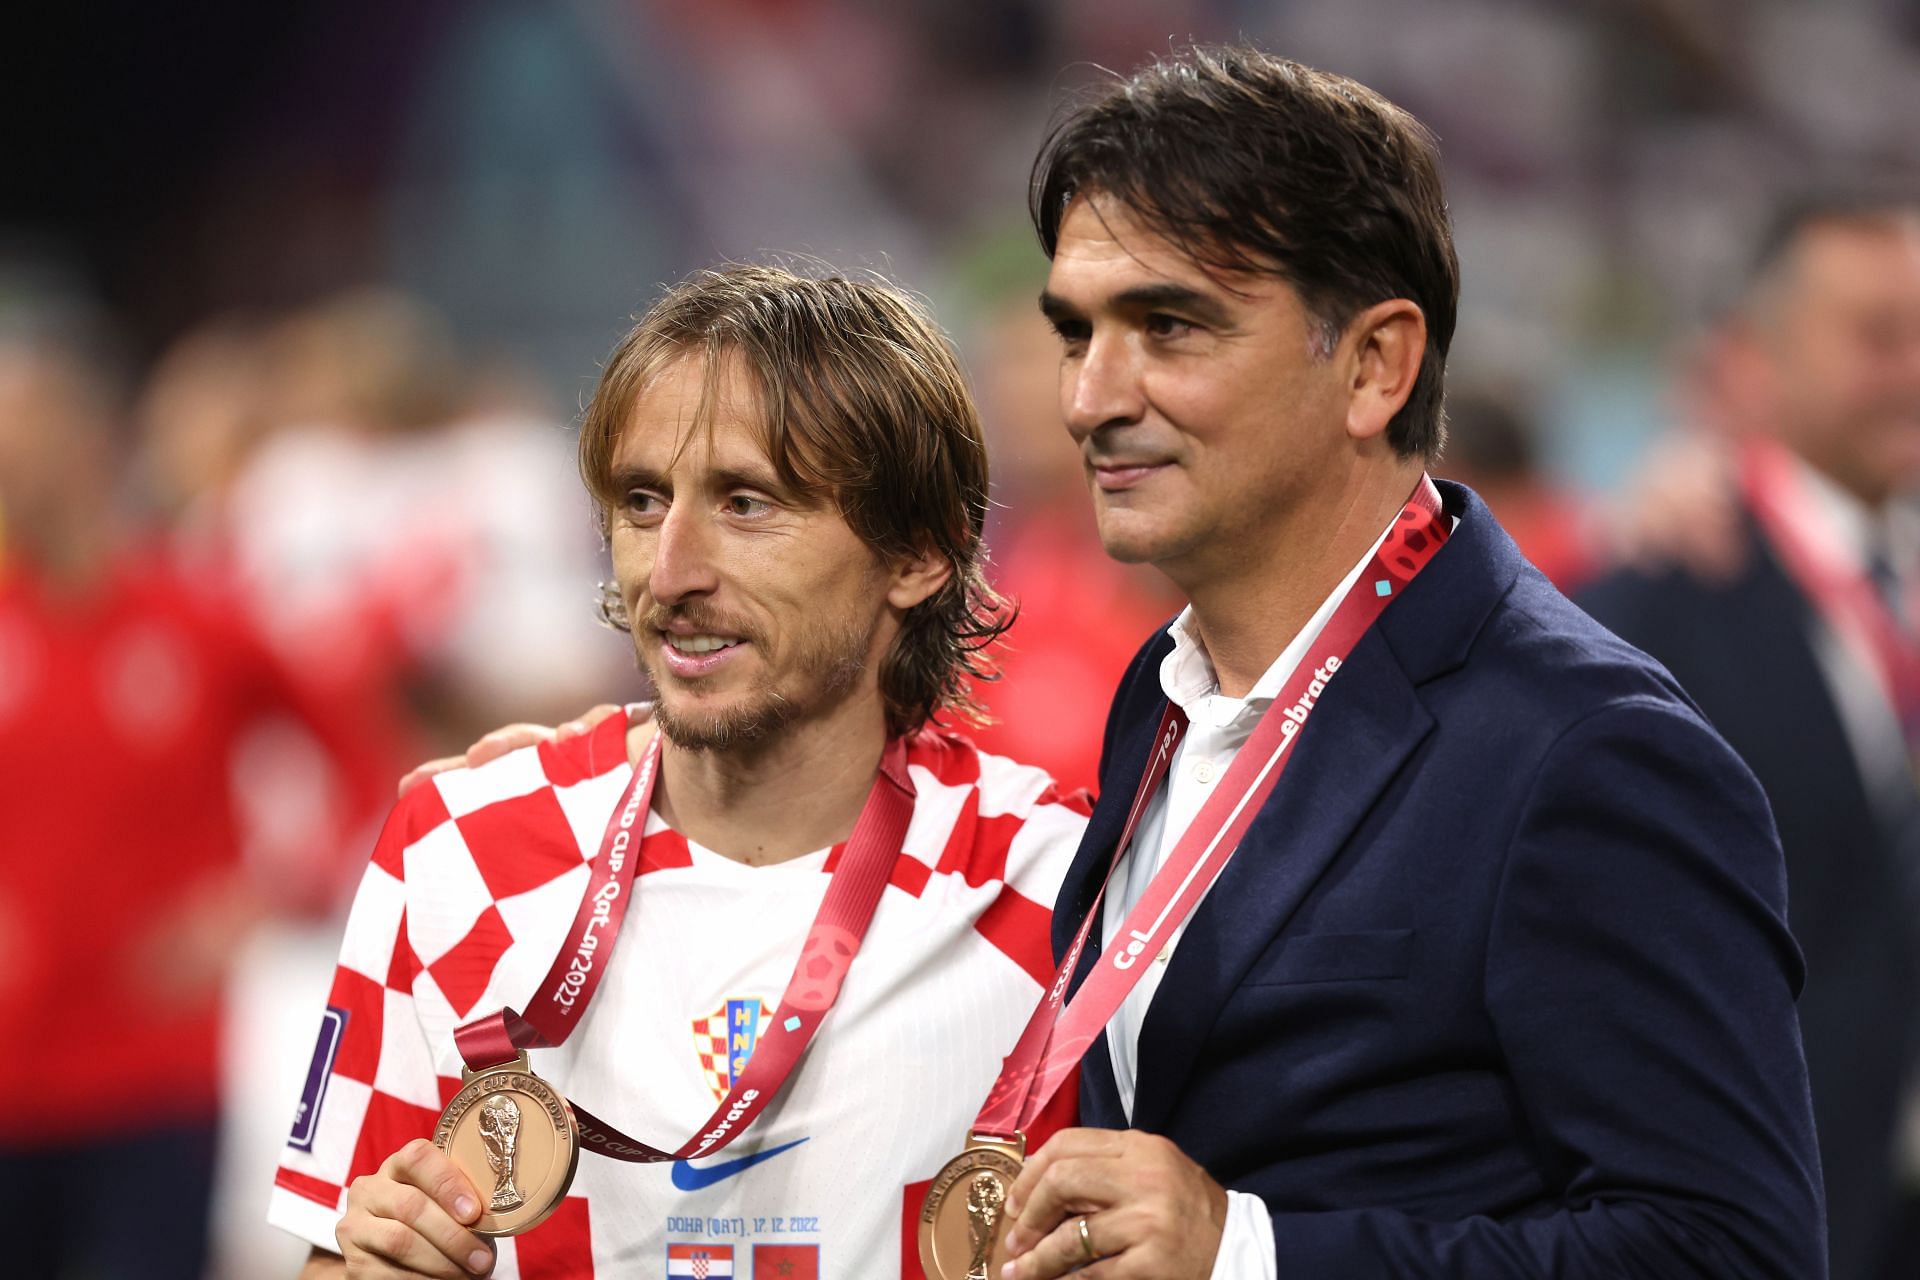 Modric (left) might have played his last World Cup game.